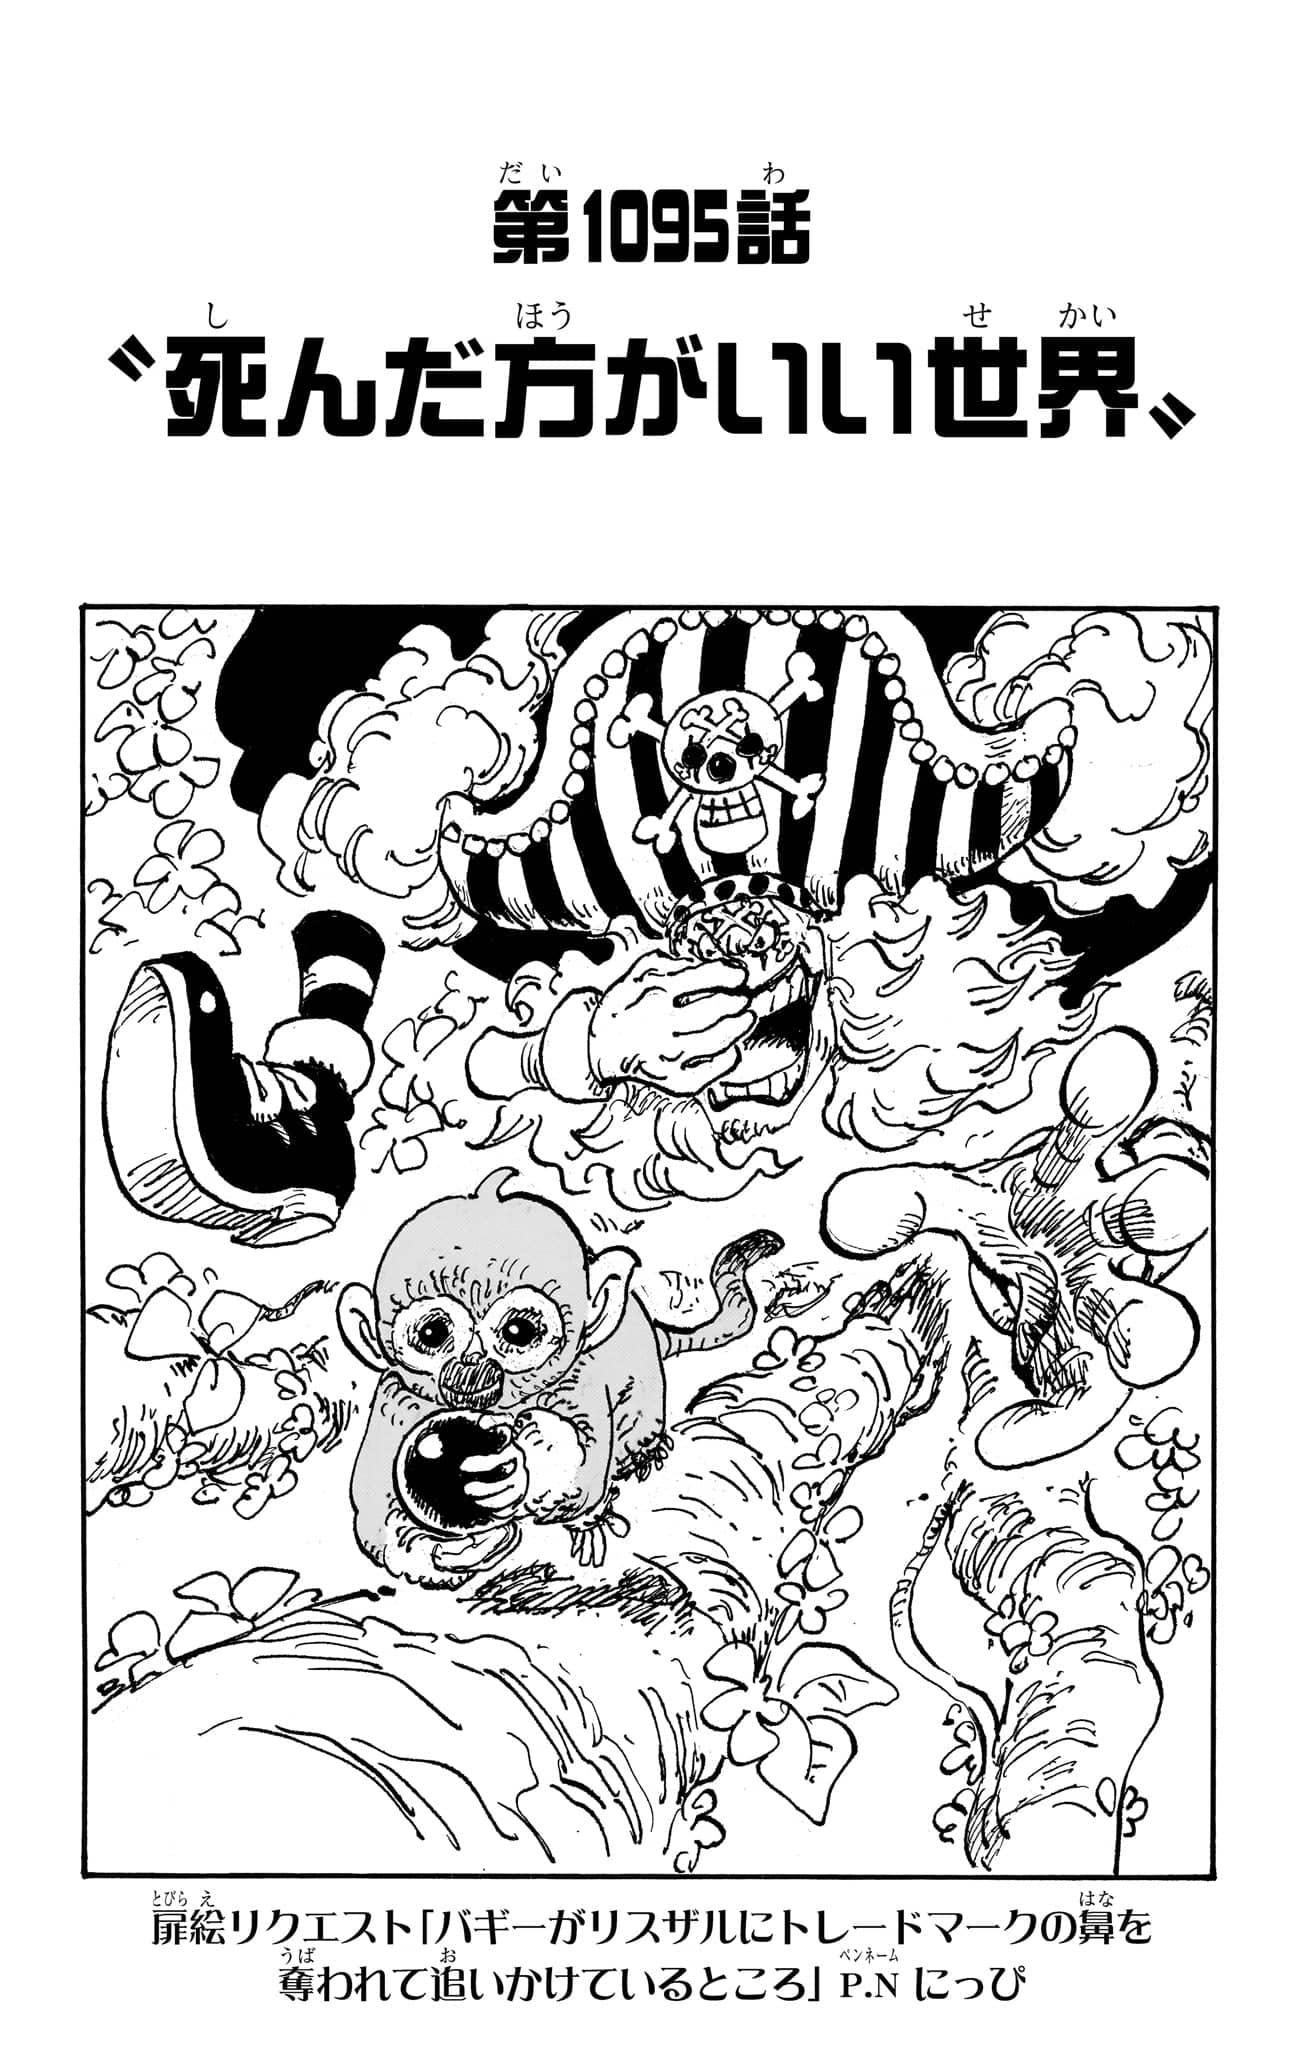 One Piece 1095 Sets Up God Valley